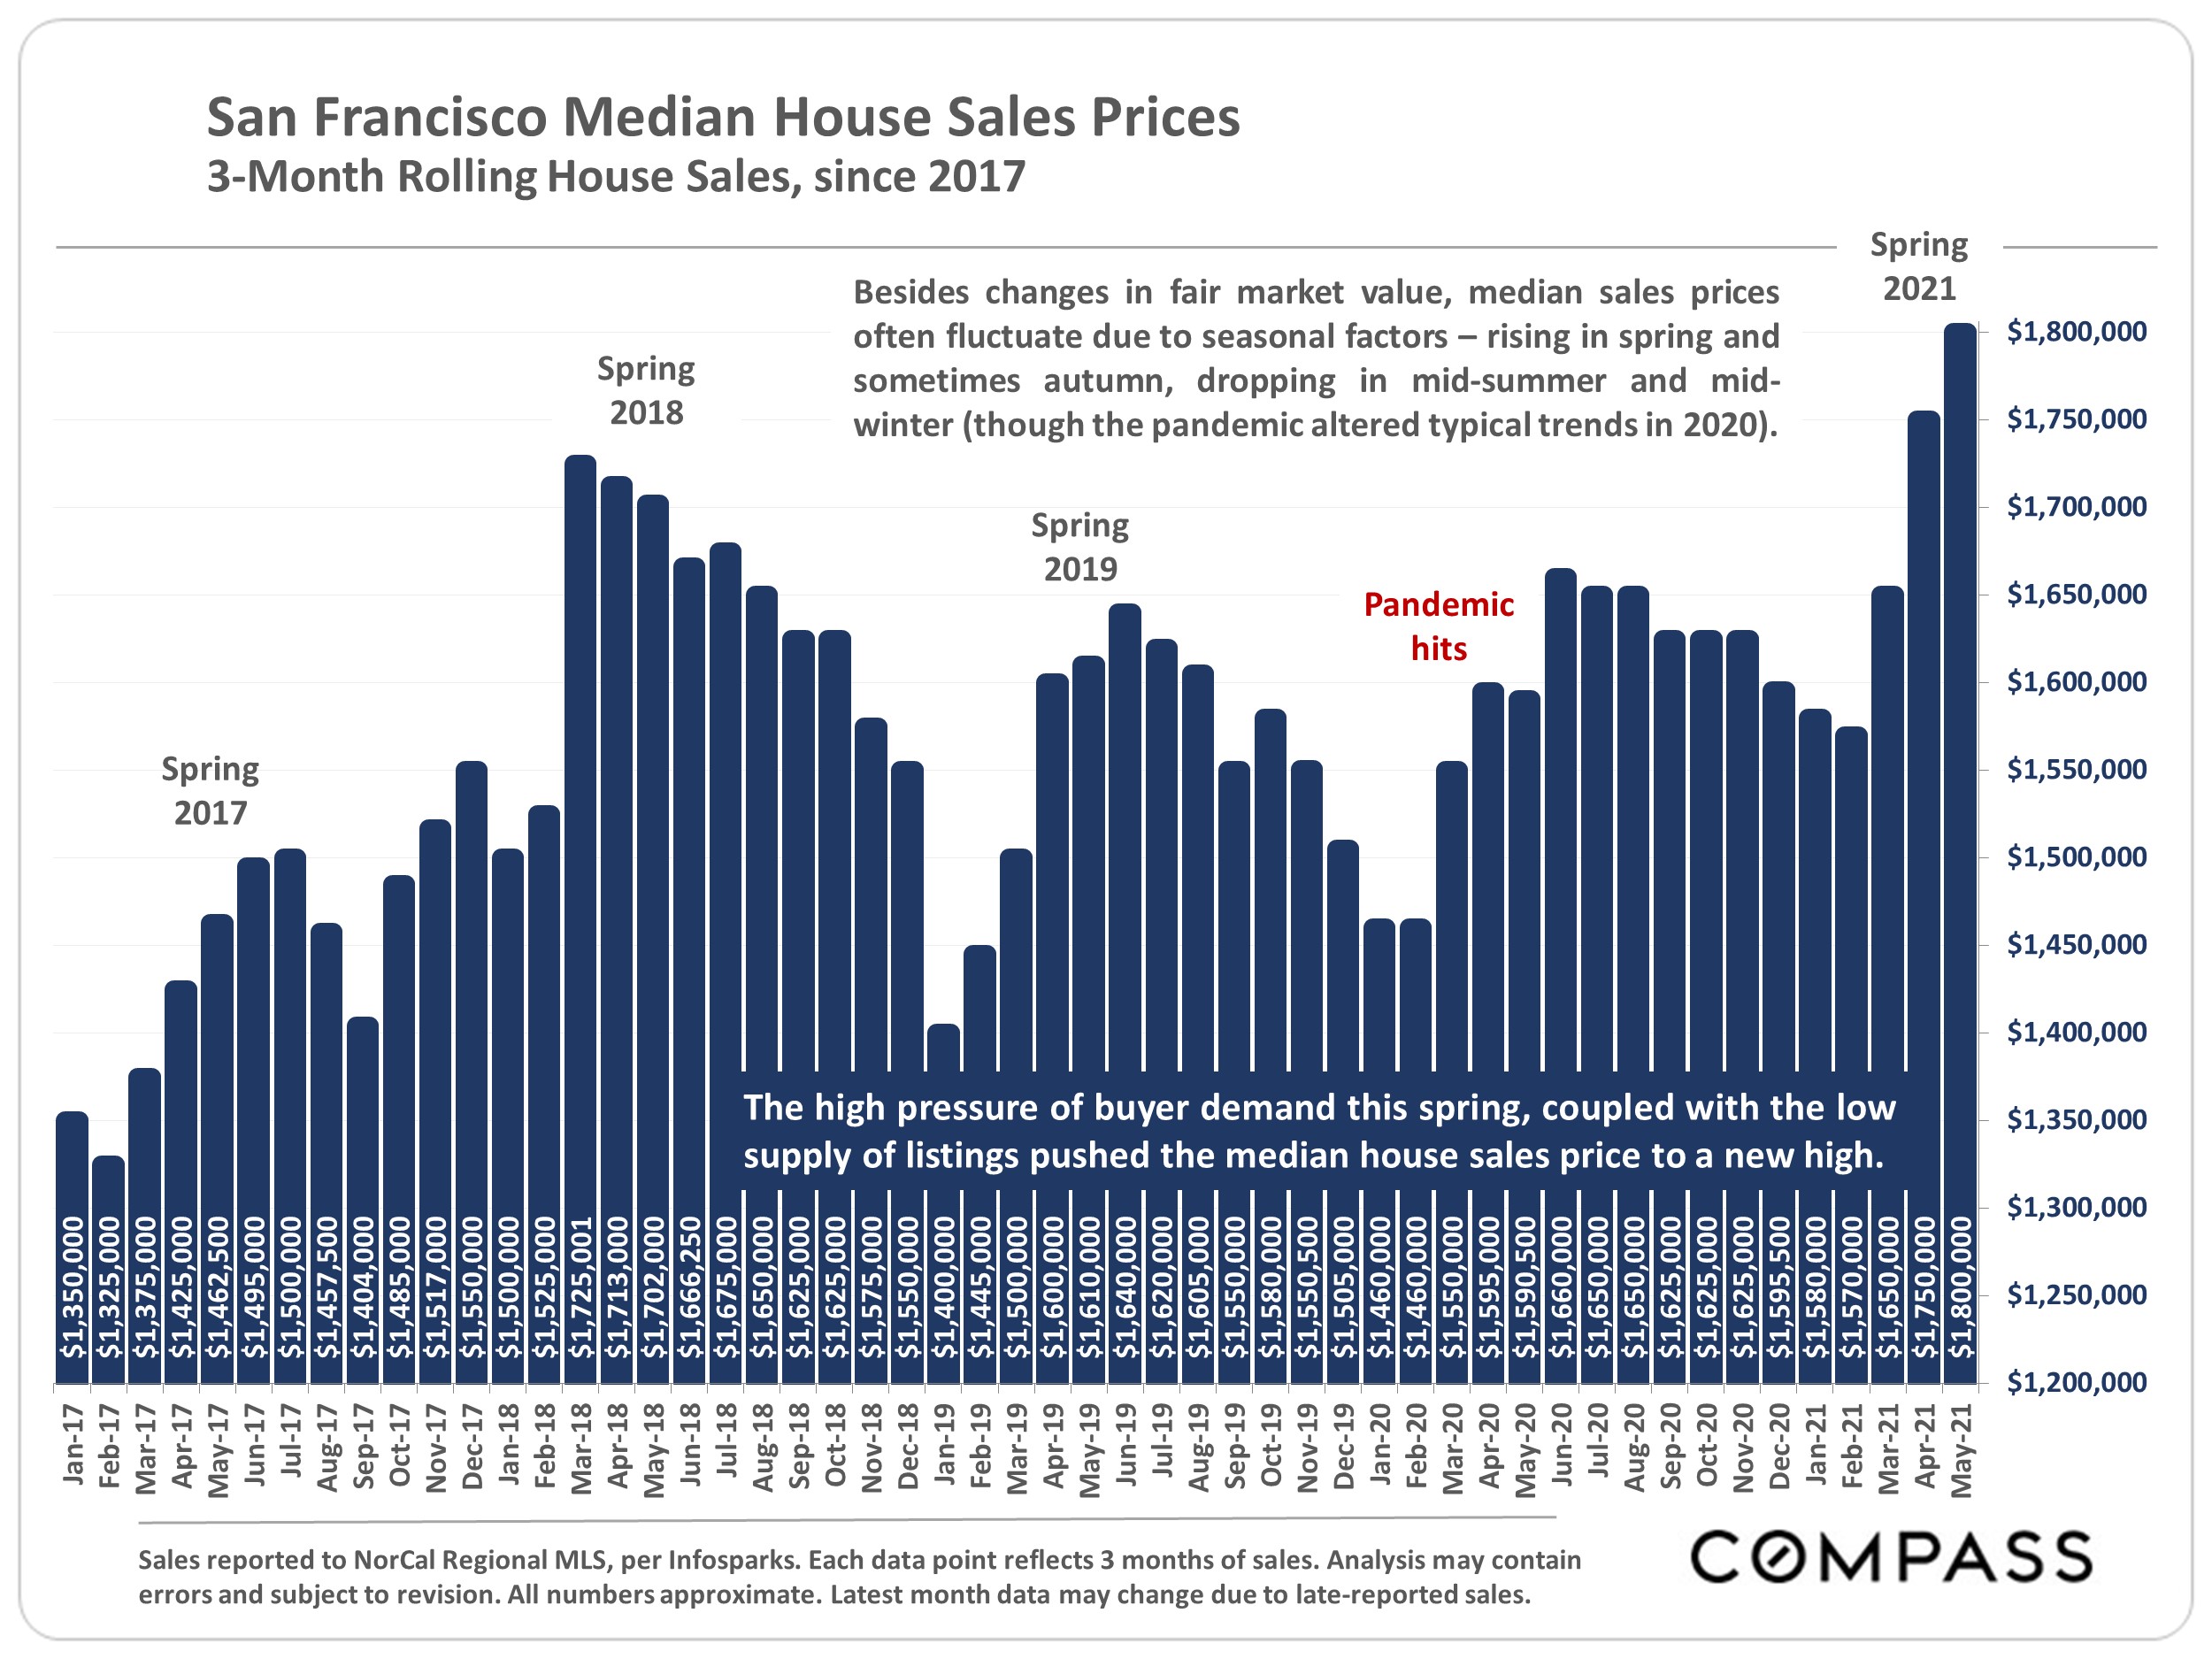 Chart showing theSan Francisco Median House Sales Prices, 3-Month Rolling House Sales, since 2017